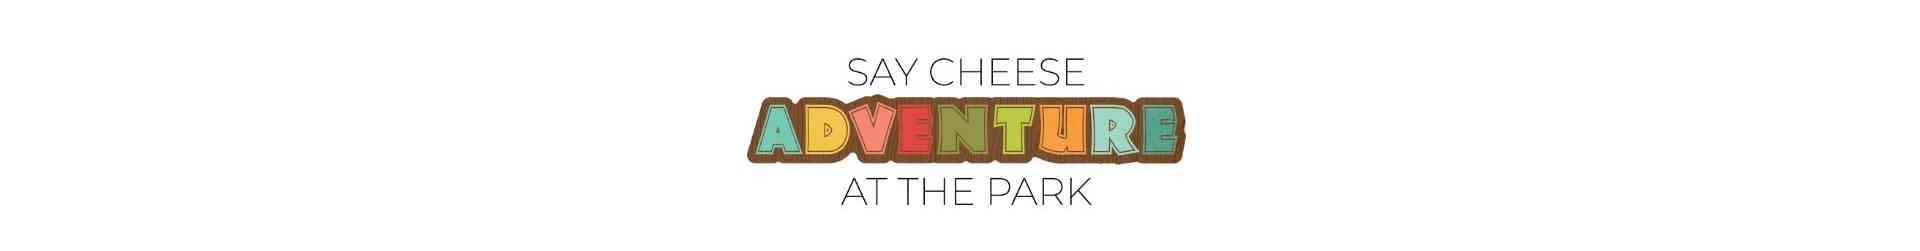 SAY CHEES ADVENTURE AT THE PARK